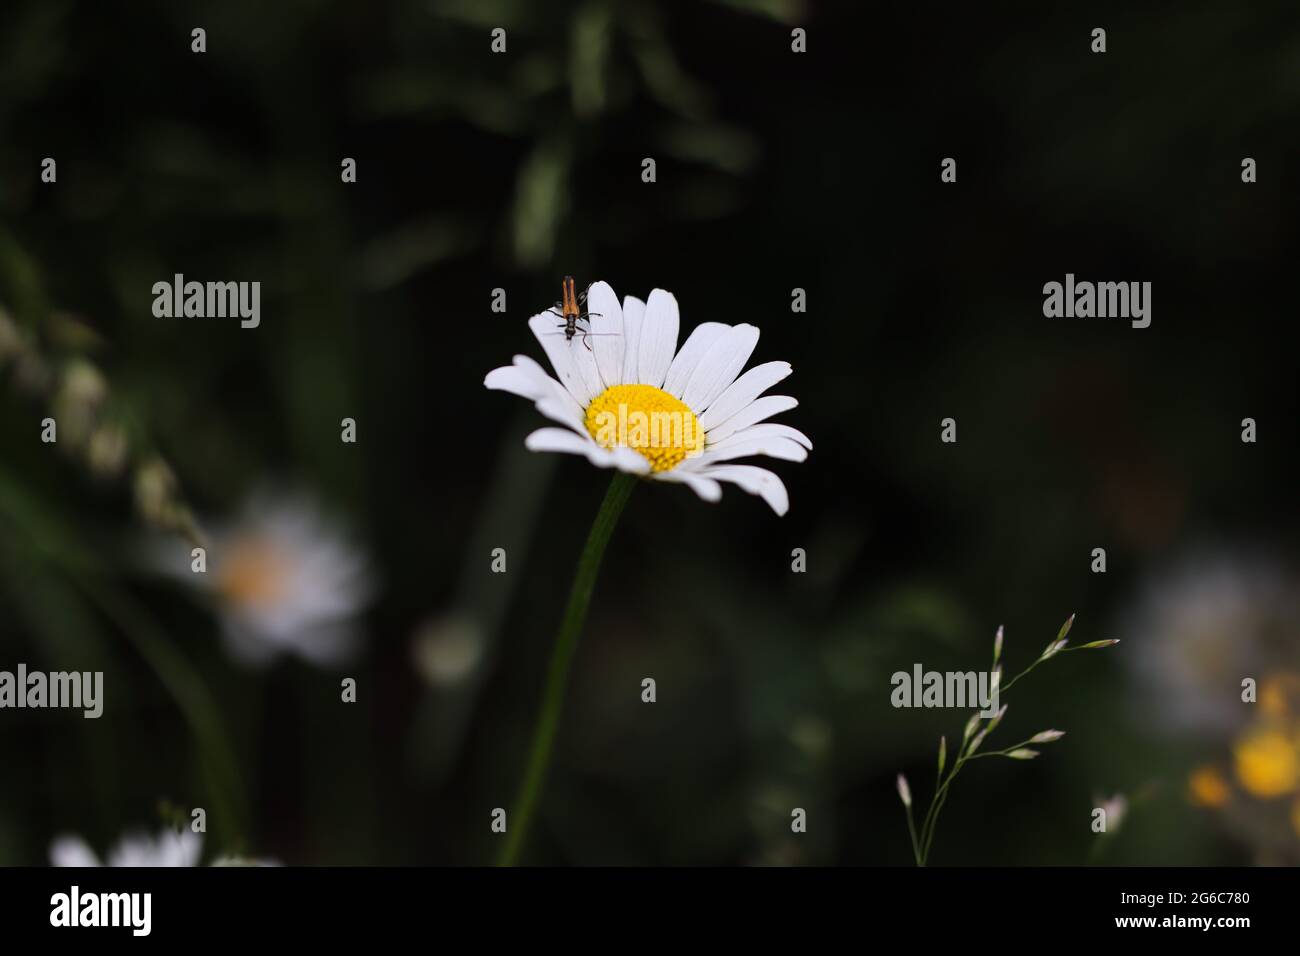 Leucanthemum is a Genus of Flowering Plants in the Aster family, Asteraceae. Moody Daisy Flower Head in Nature. Stock Photo